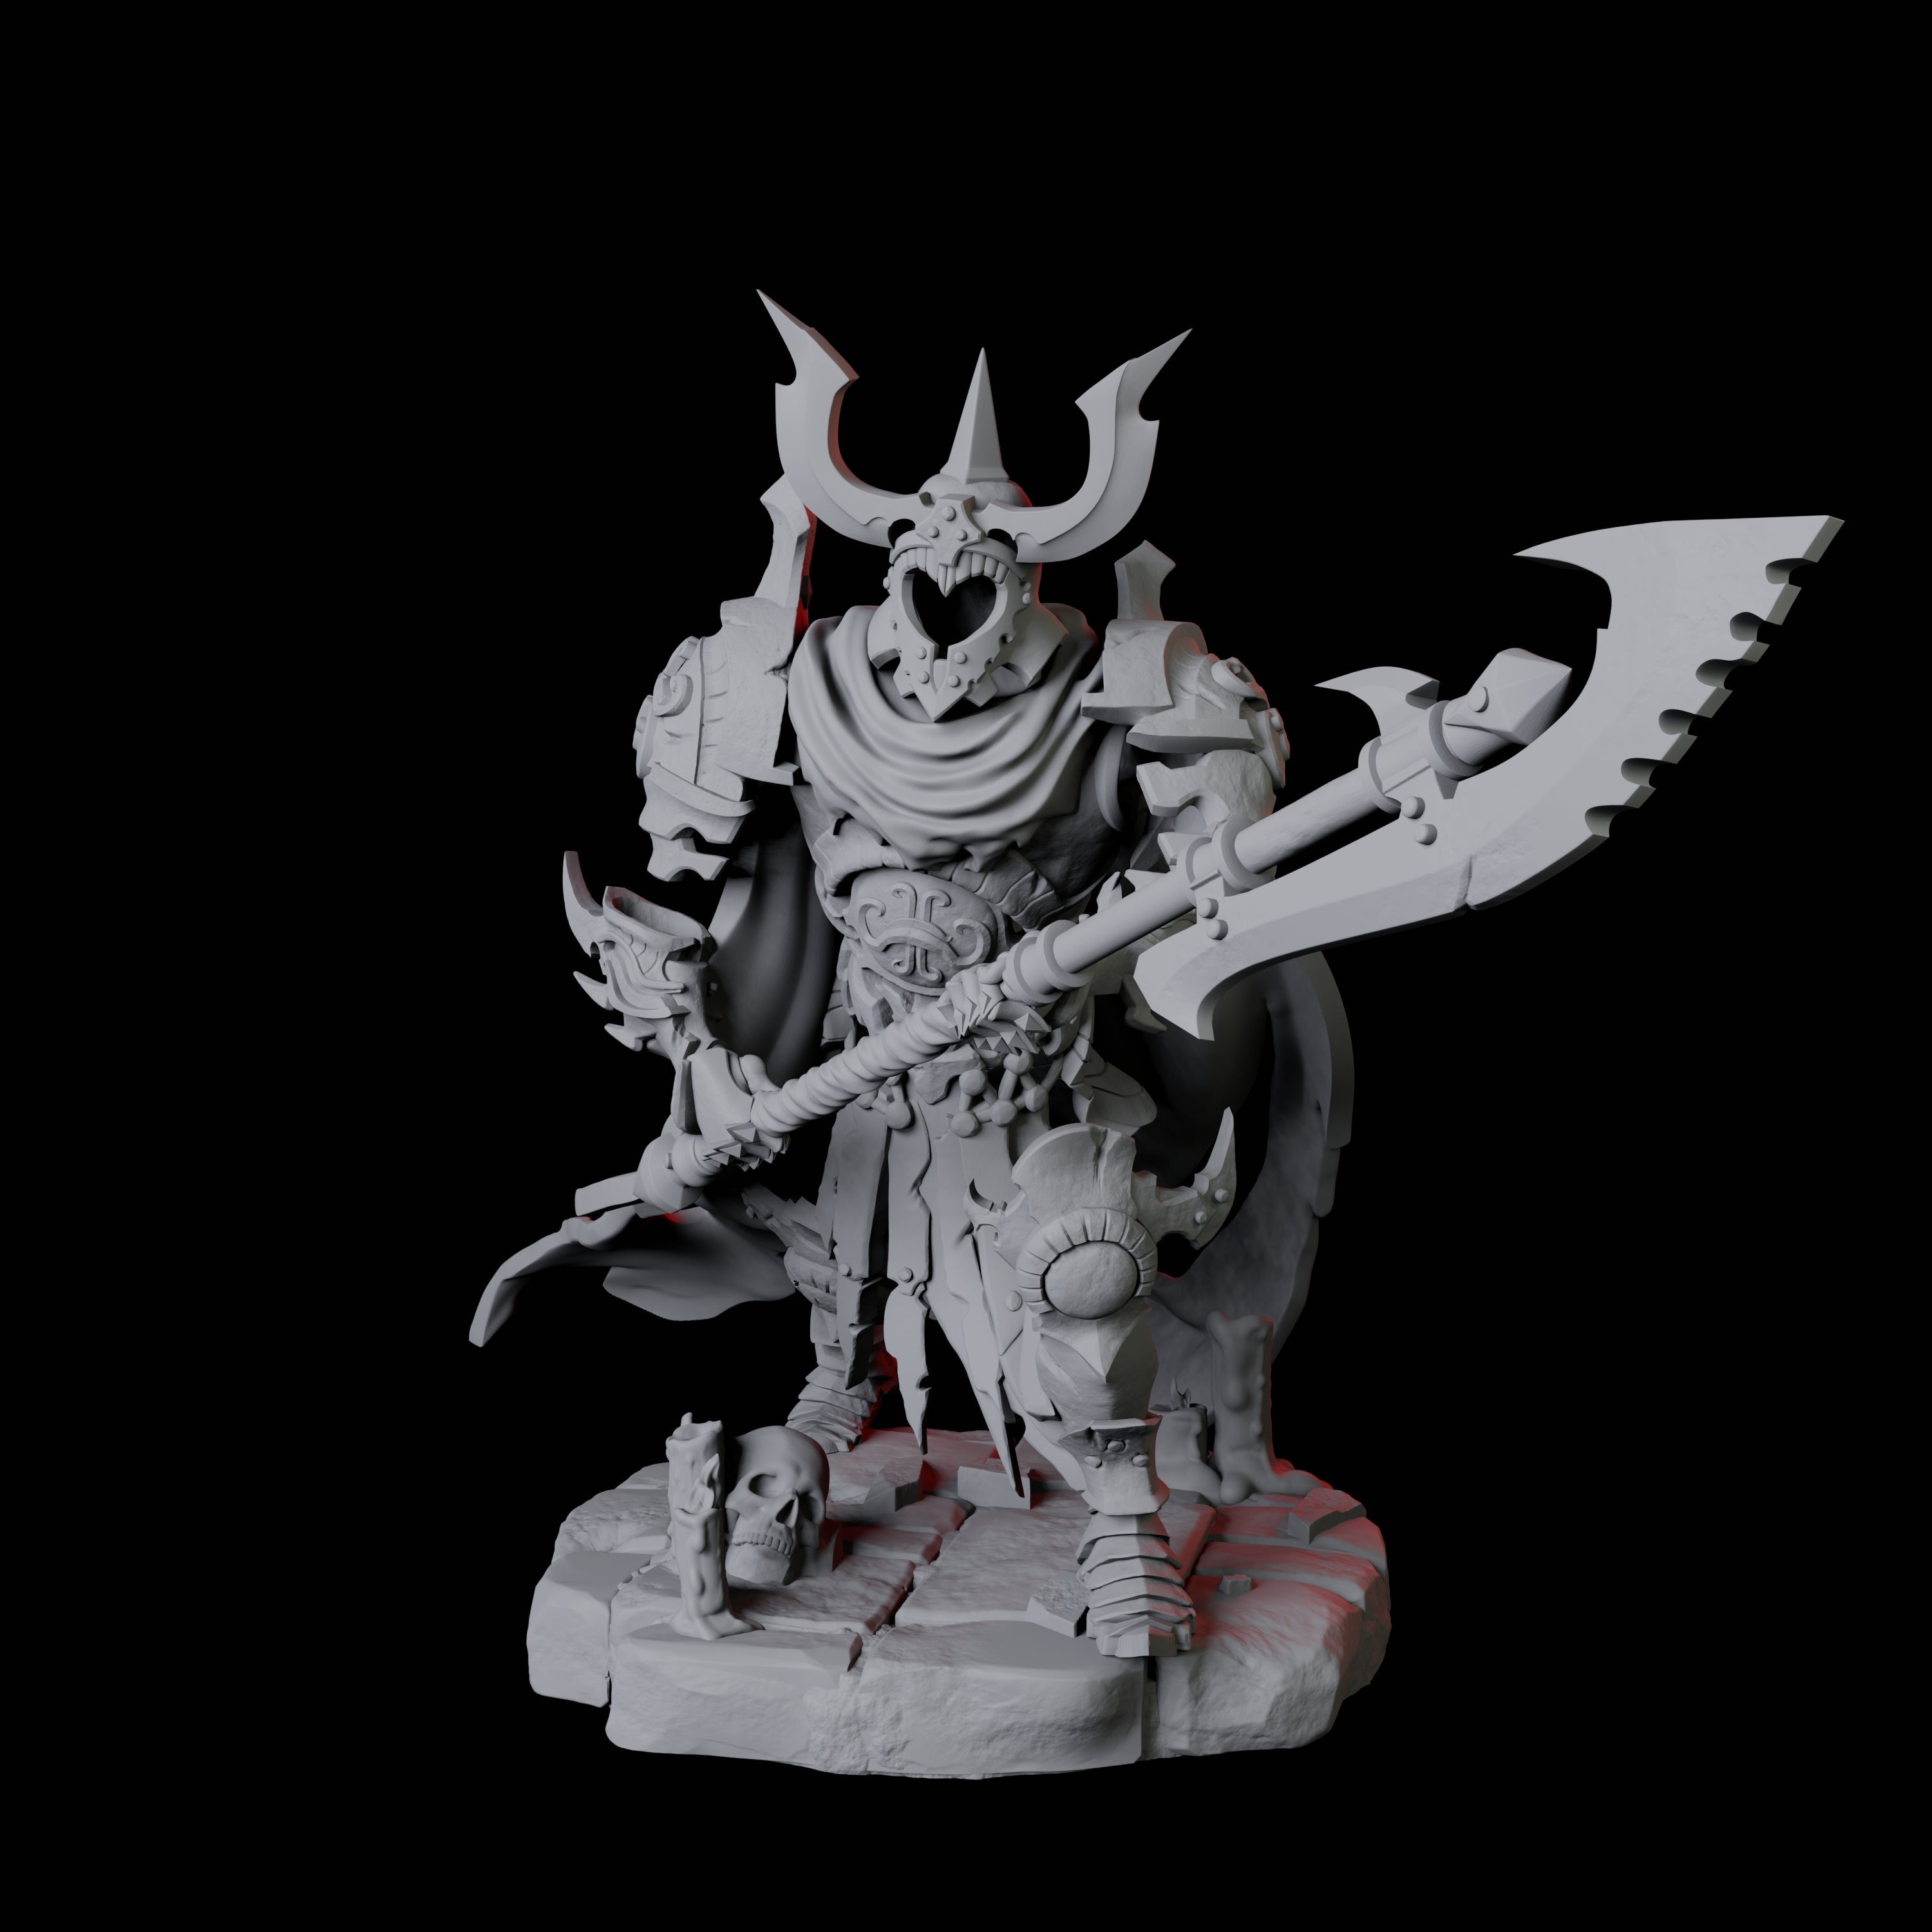 Stalking Revenant D Miniature for Dungeons and Dragons, Pathfinder or other TTRPGs